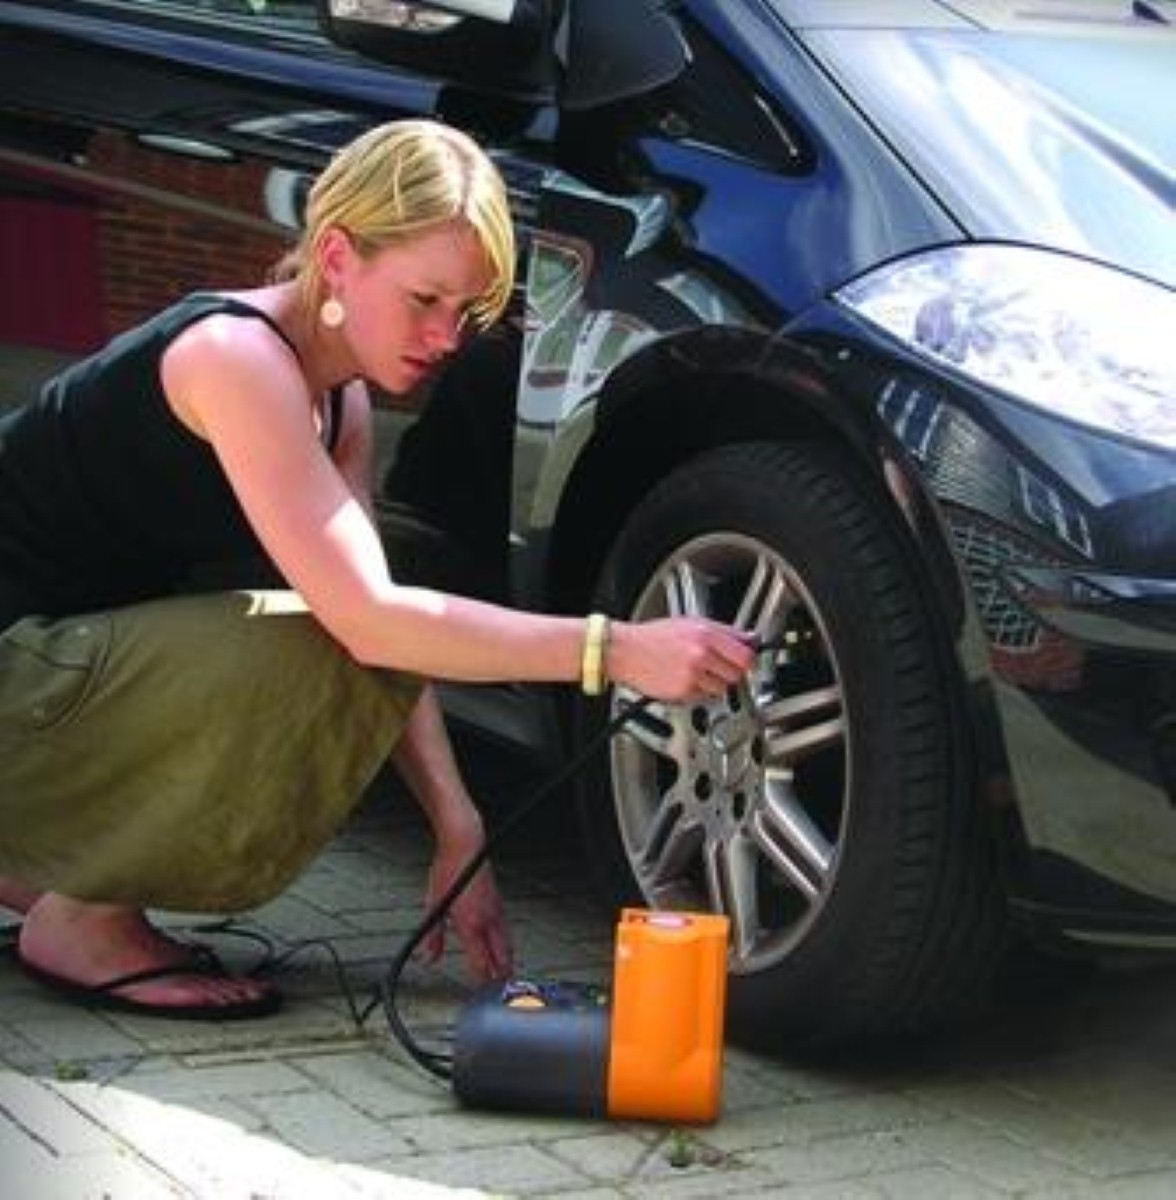 Tyre pressure checks like this could become a thing of the past